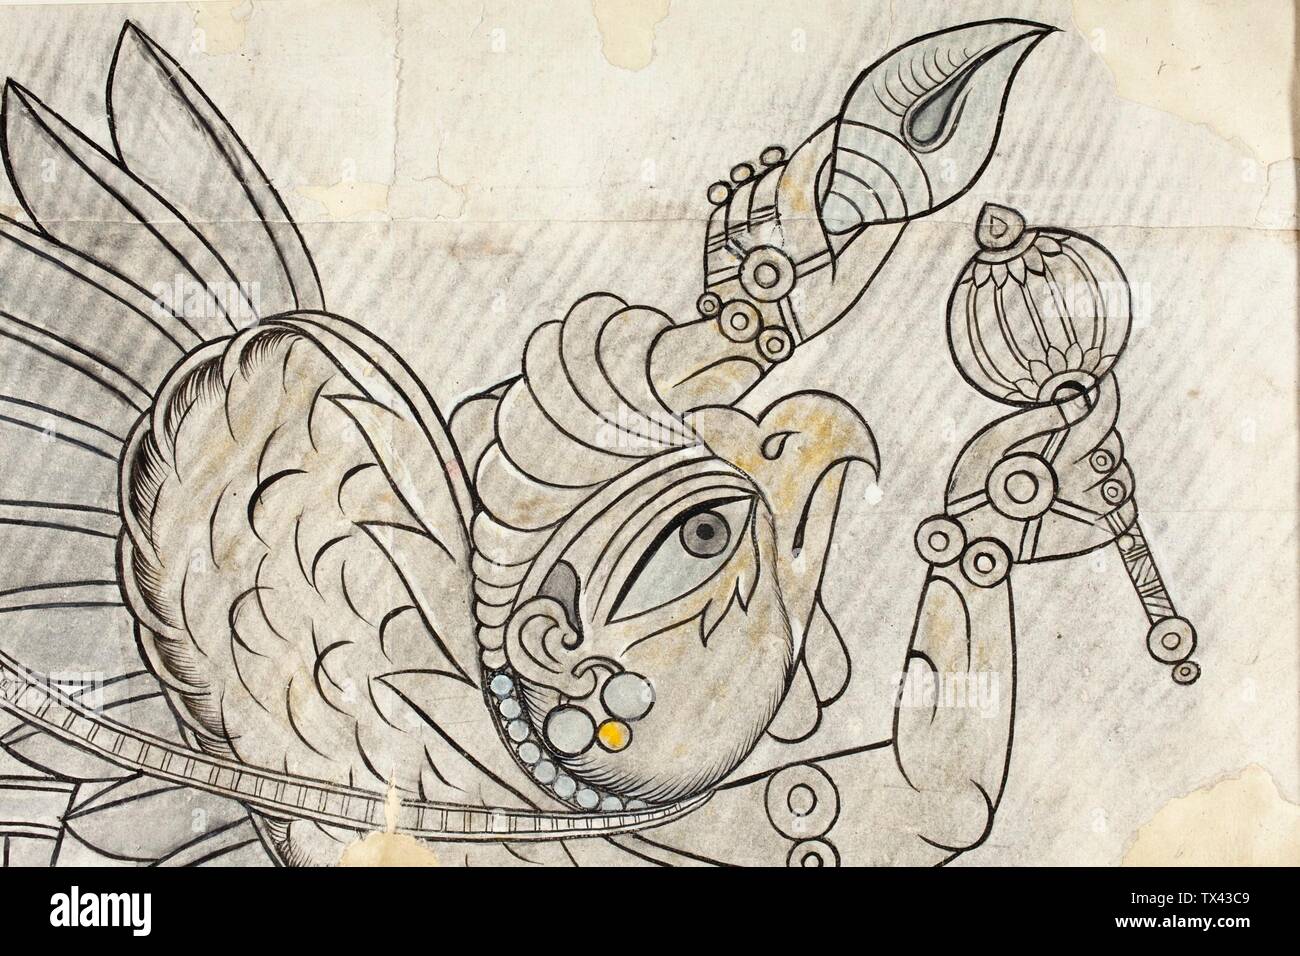 Garuda Flying through the Air (image 3 of 3);  India, Rajasthan, Bundi, circa 1750-1775 Drawings Ink and opaque watercolor on paper 24 1/4 x 27 3/8 in. (61.59 x 69.53 cm) Gift of Paul F. Walter (M.79.191.24) South and Southeast Asian Art; between circa 1750 and circa 1775 date QS:P571,+1750-00-00T00:00:00Z/7,P1319,+1750-00-00T00:00:00Z/9,P1326,+1775-00-00T00:00:00Z/9,P1480,Q5727902; Stock Photo